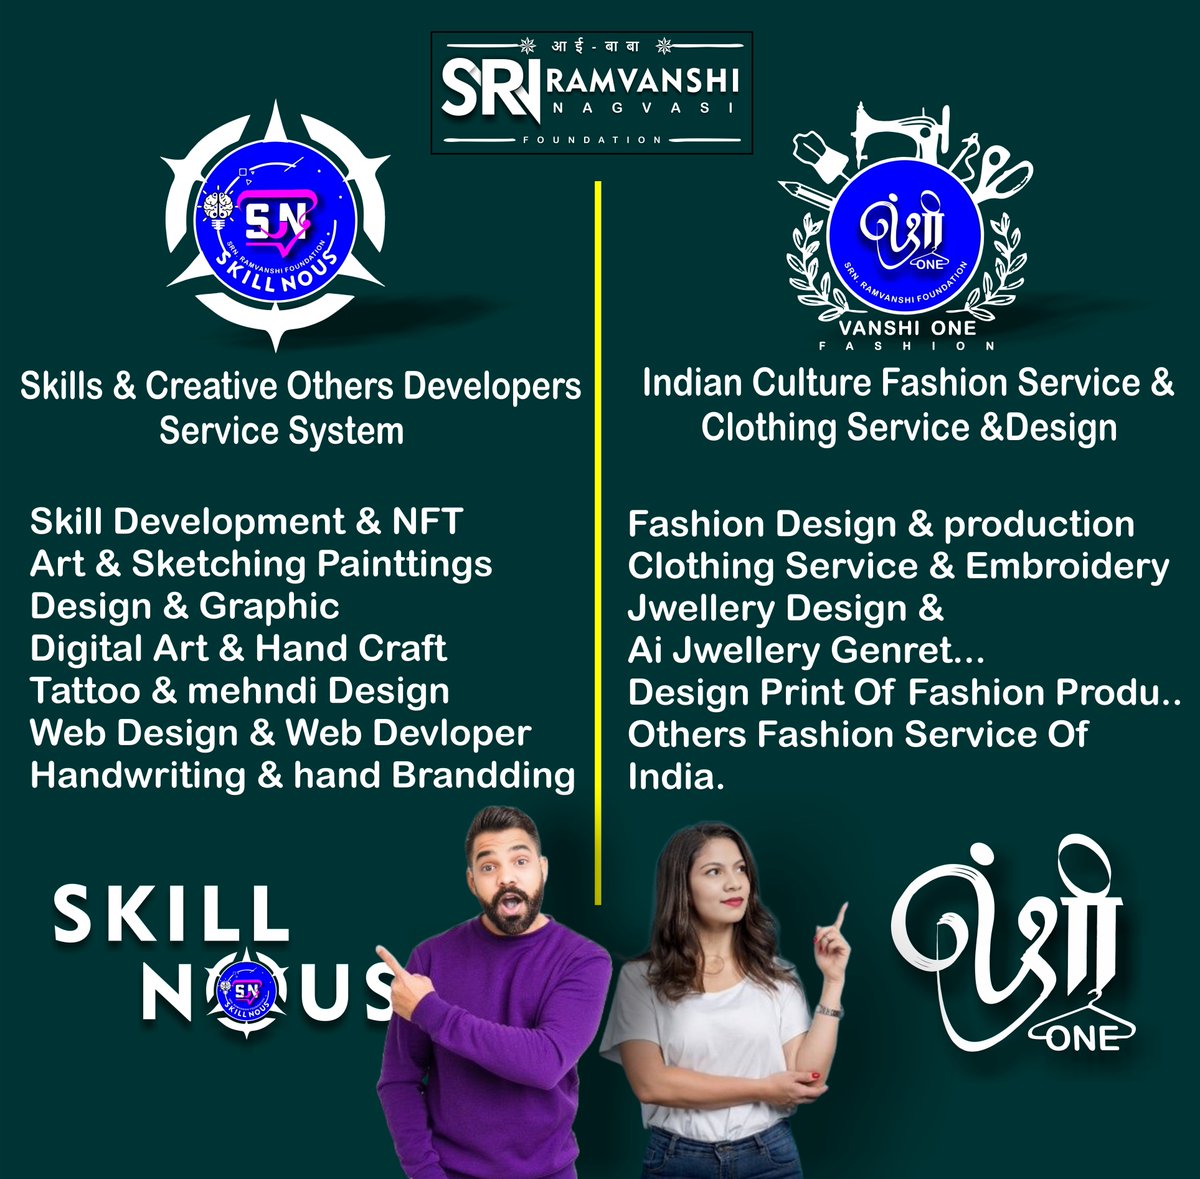 Startup Online / Offline BusinessJust checked out Startup. Love how they blend online and offline services for new businesses. Smart stuff! And Vanshi One's fashion game is strong. Cool to see new players stepping up! #skillnous #SN #vanshi_one #mumbaimetro #GodMorningTuesday